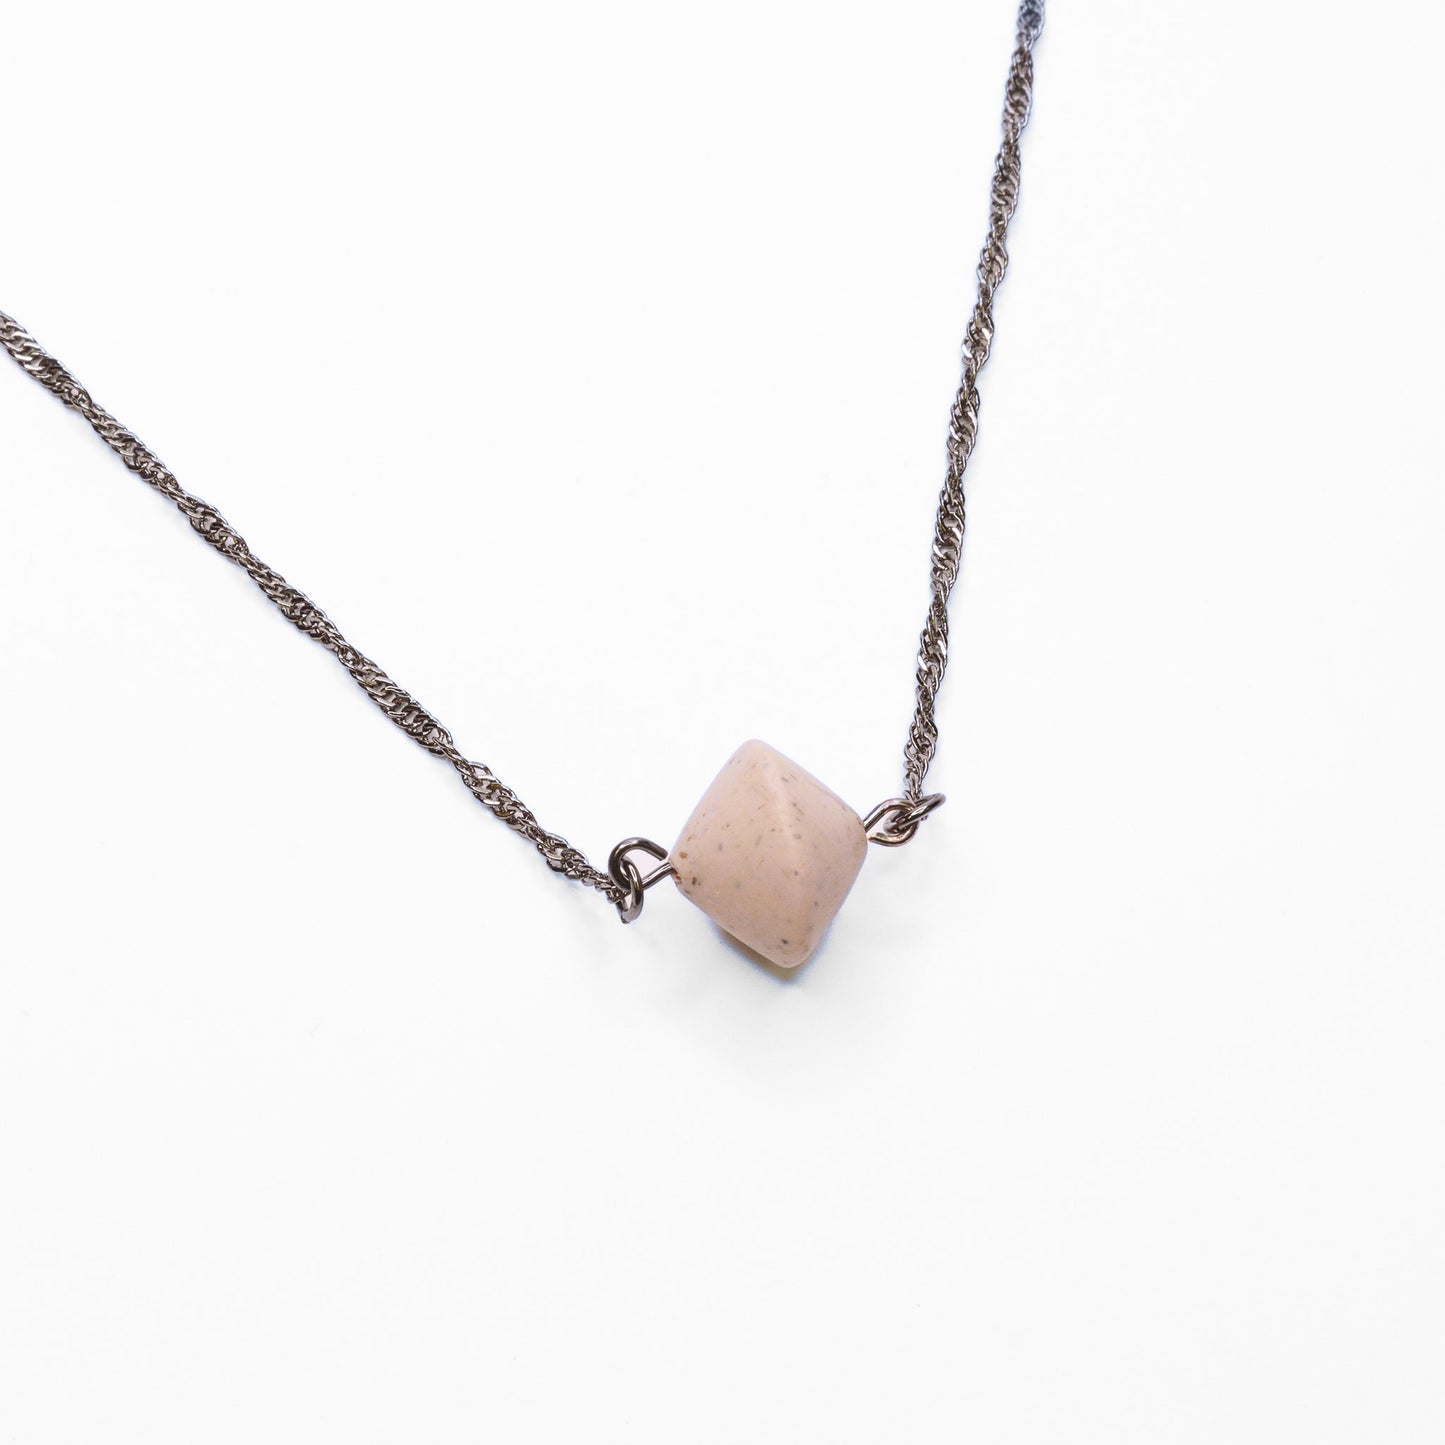 Necklaces - Stone Pink *Choose your style*